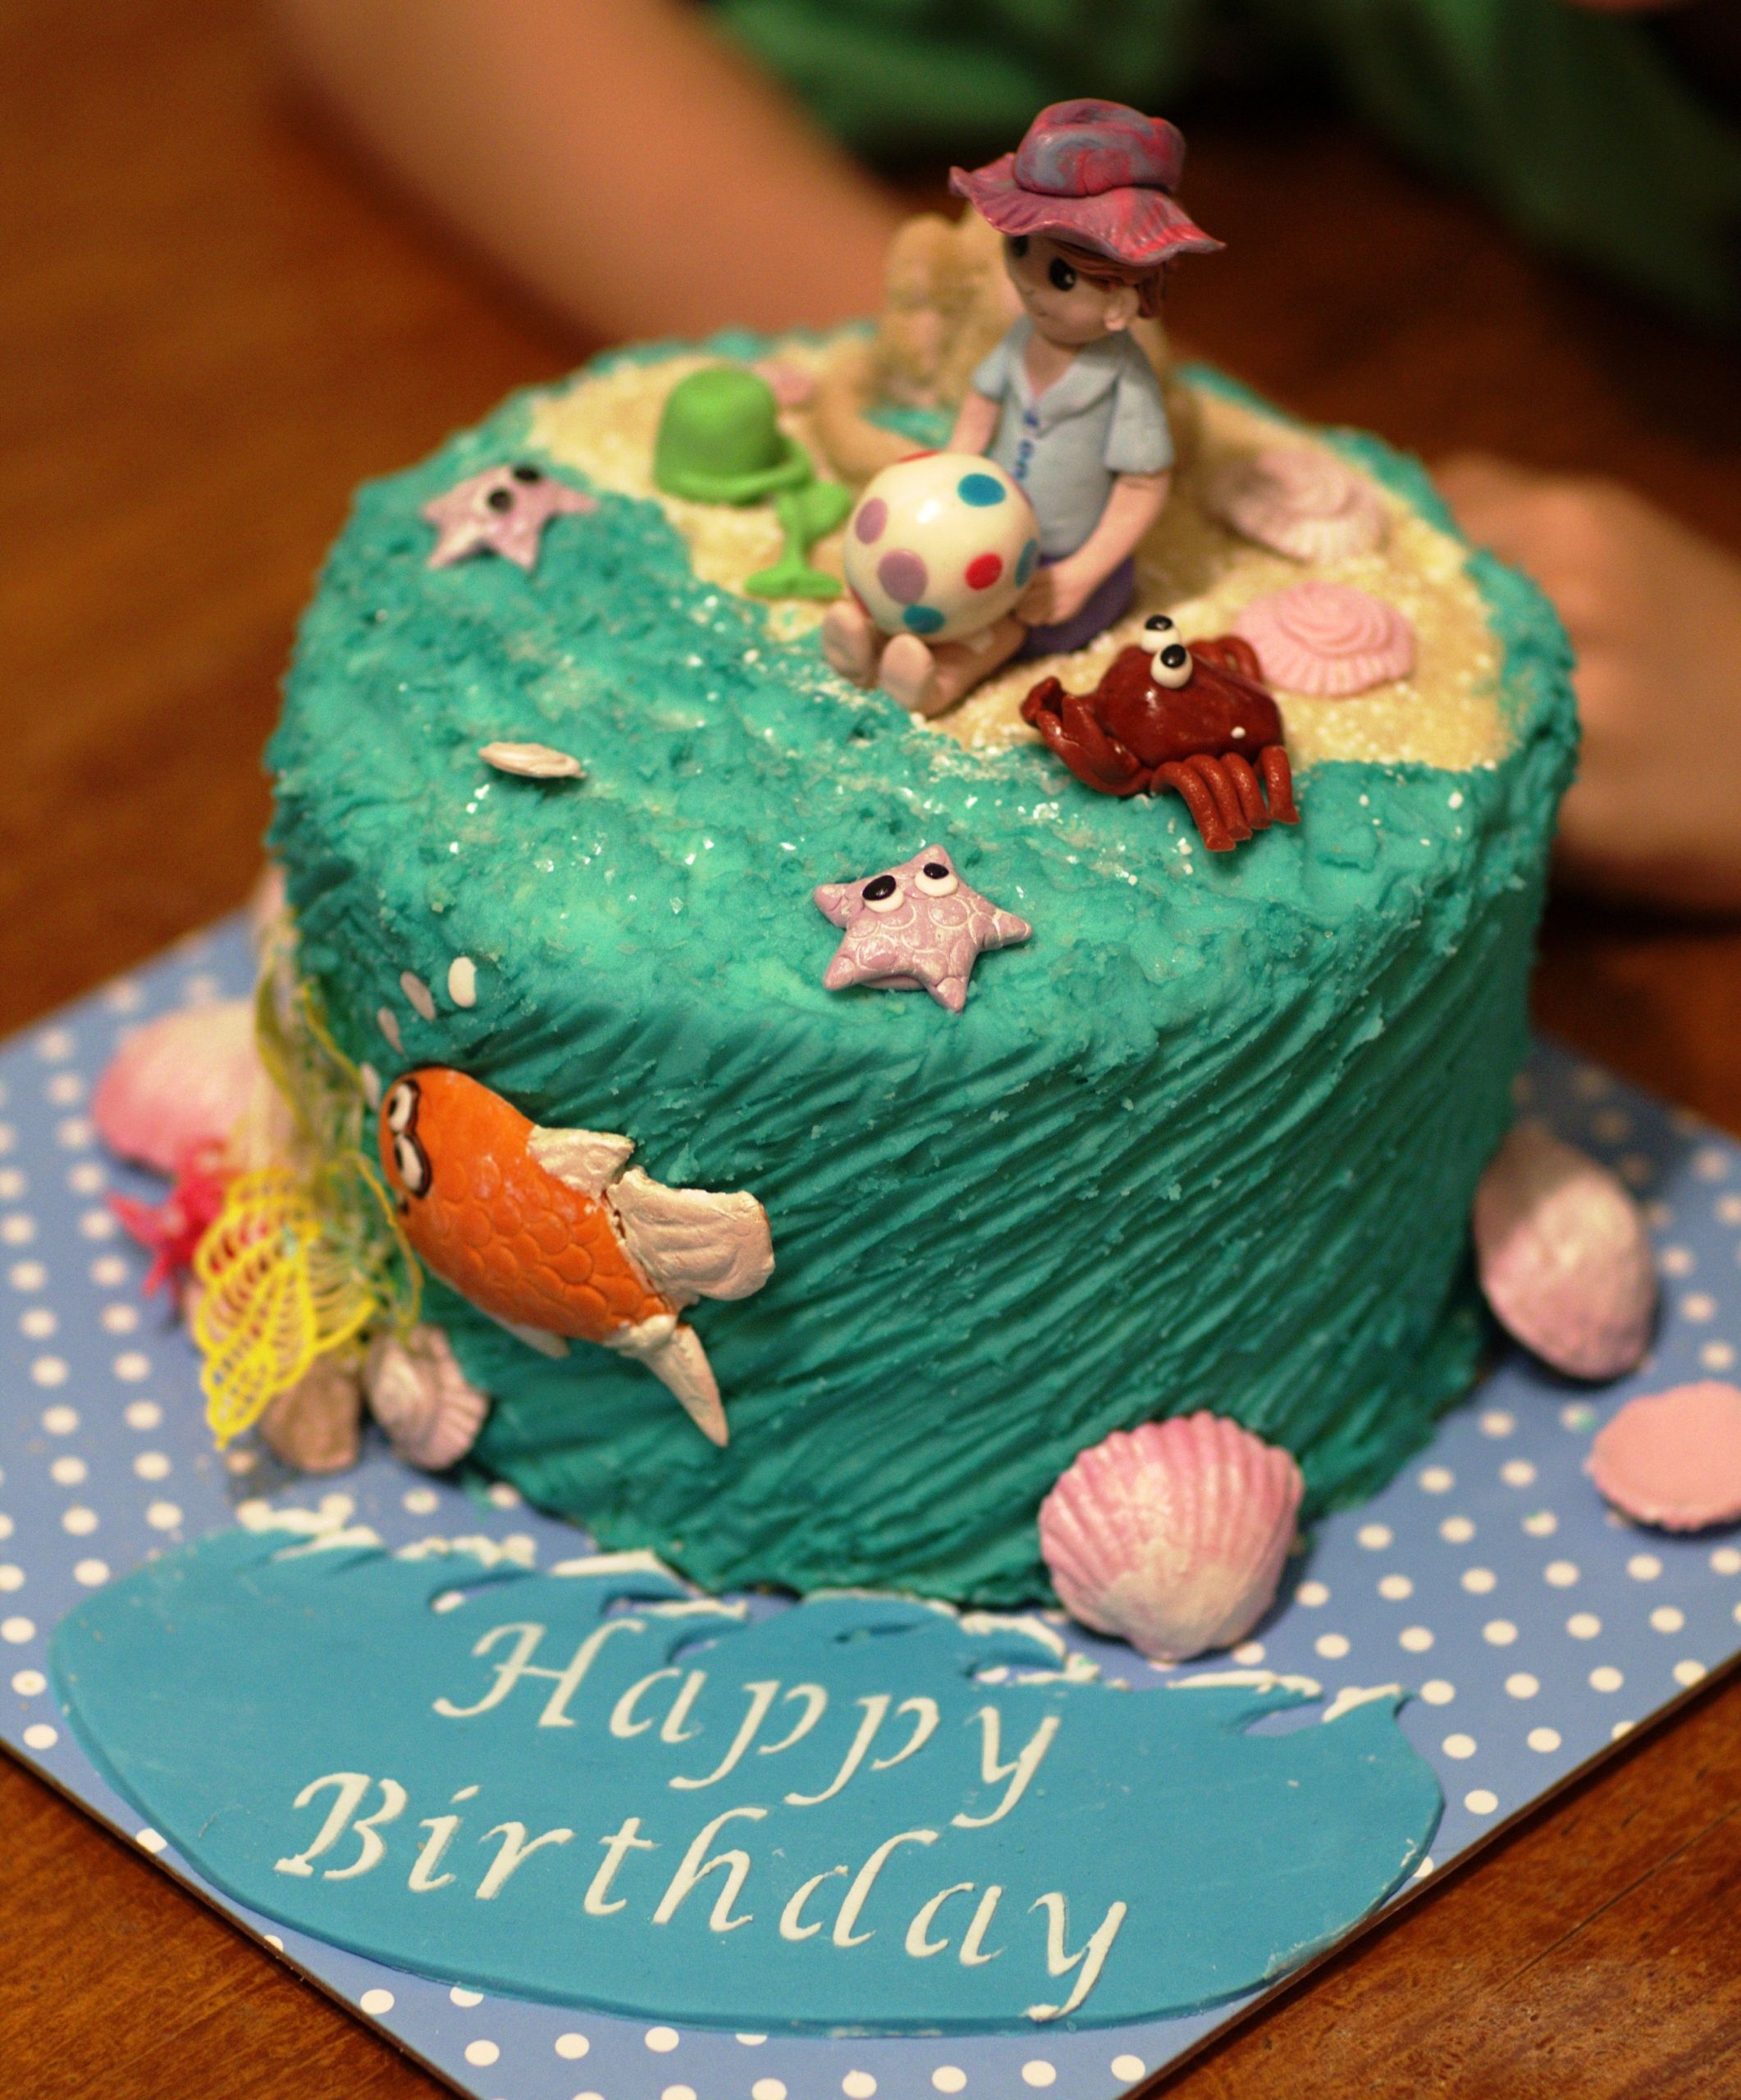 15 Beach Birthday Cake
 You Can Make In 5 Minutes